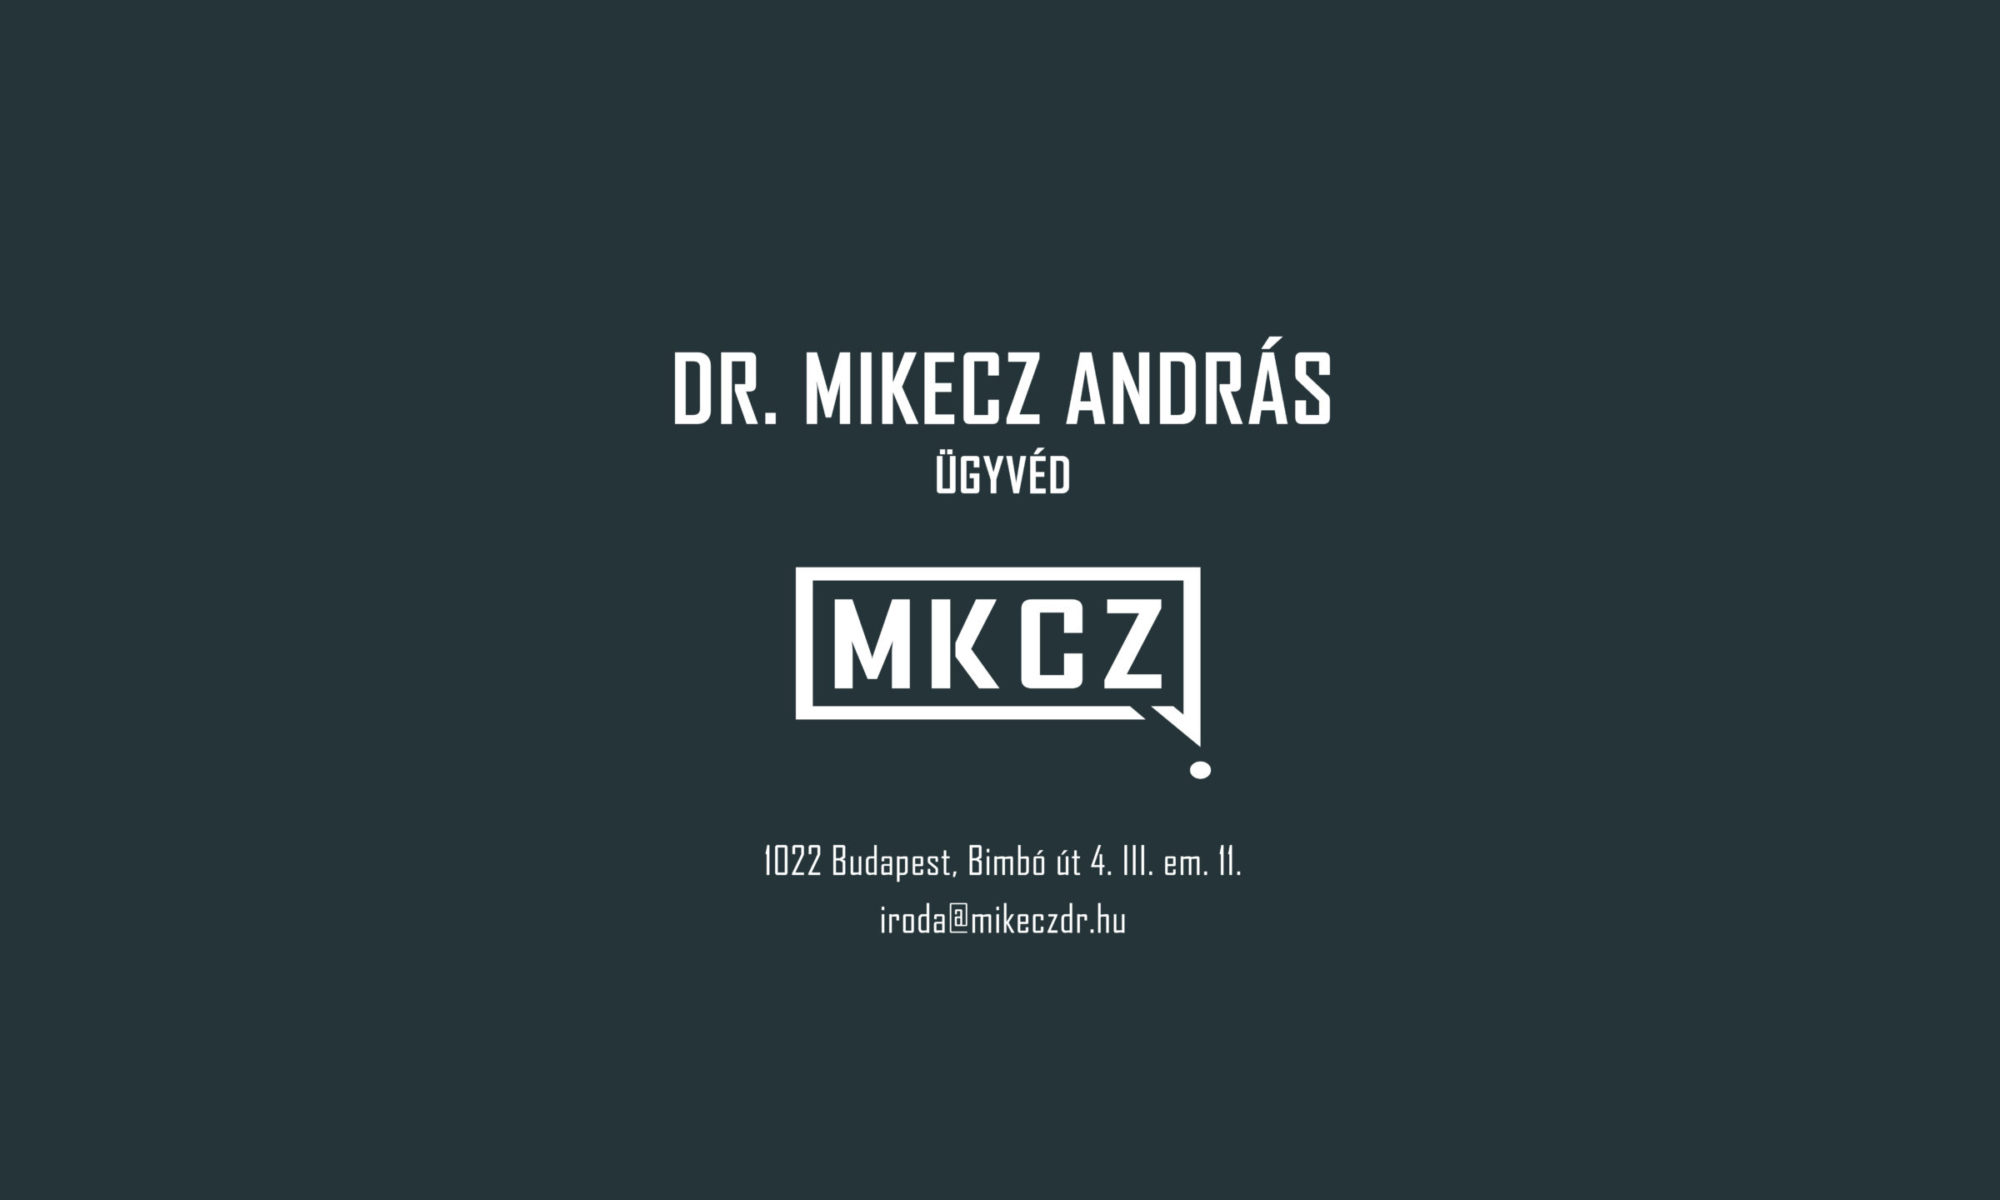 Dr Mikecz András